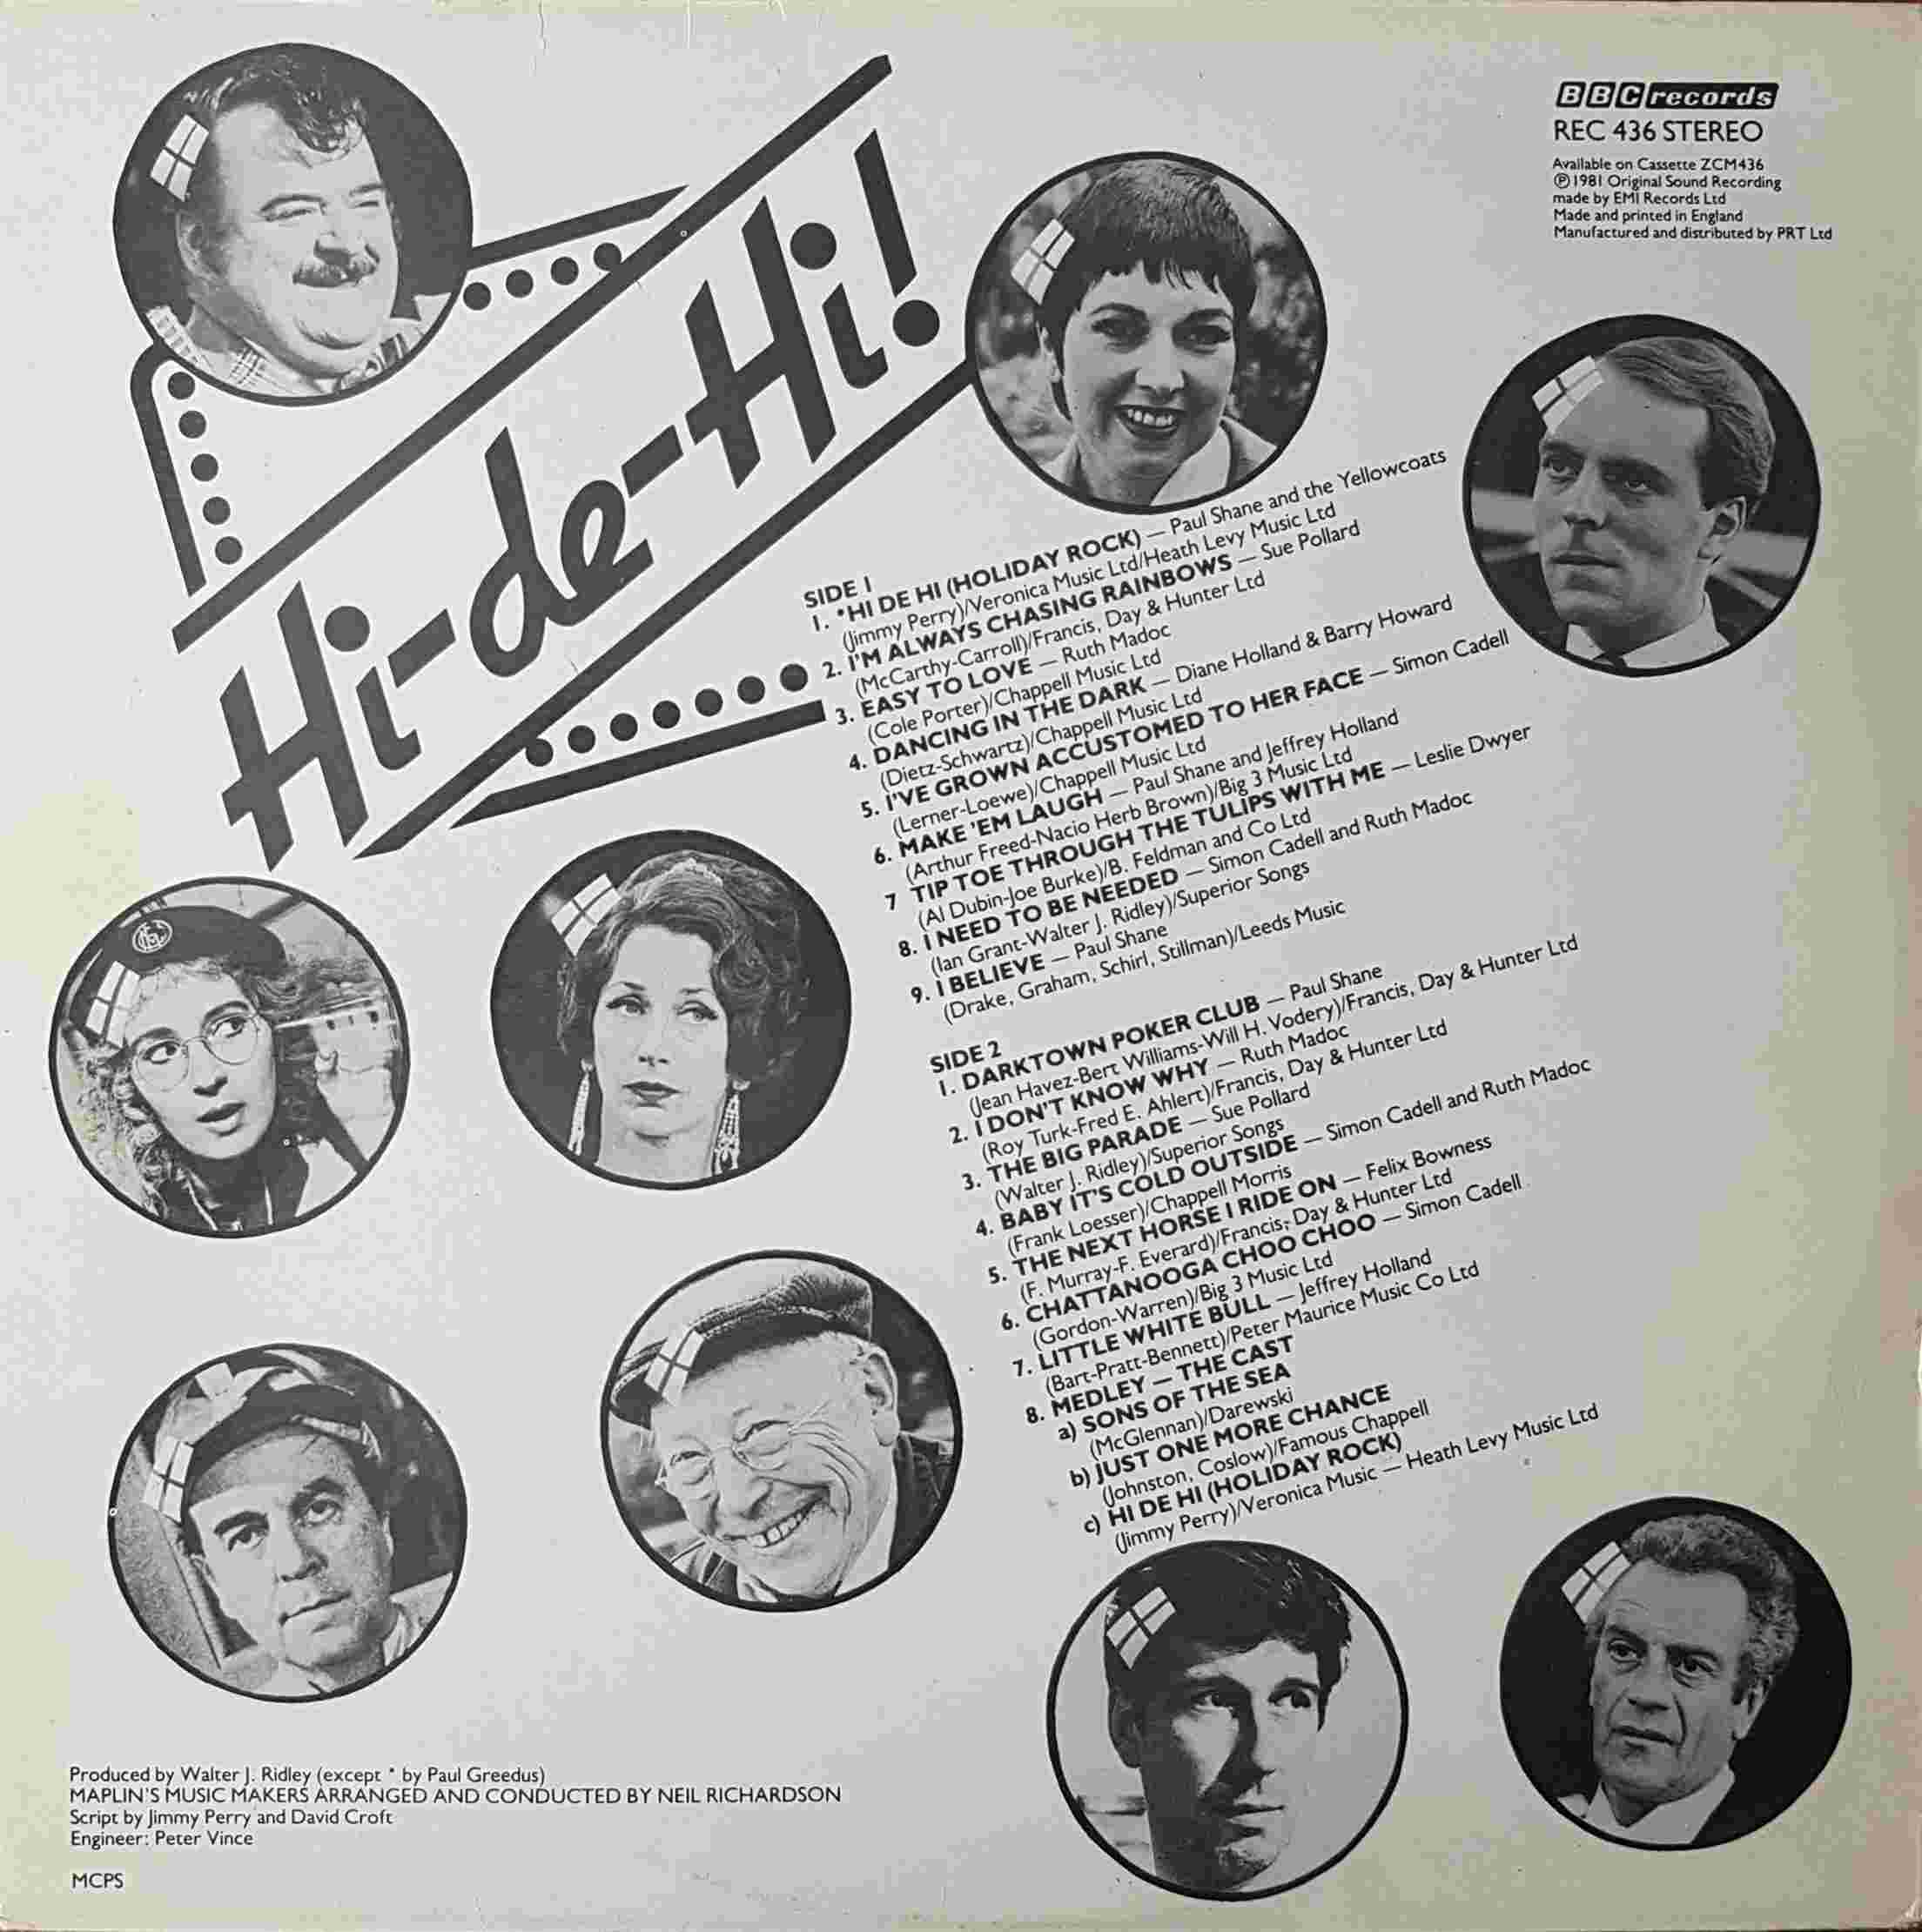 Picture of REC 436 Hi - de - hi by artist Various from the BBC records and Tapes library